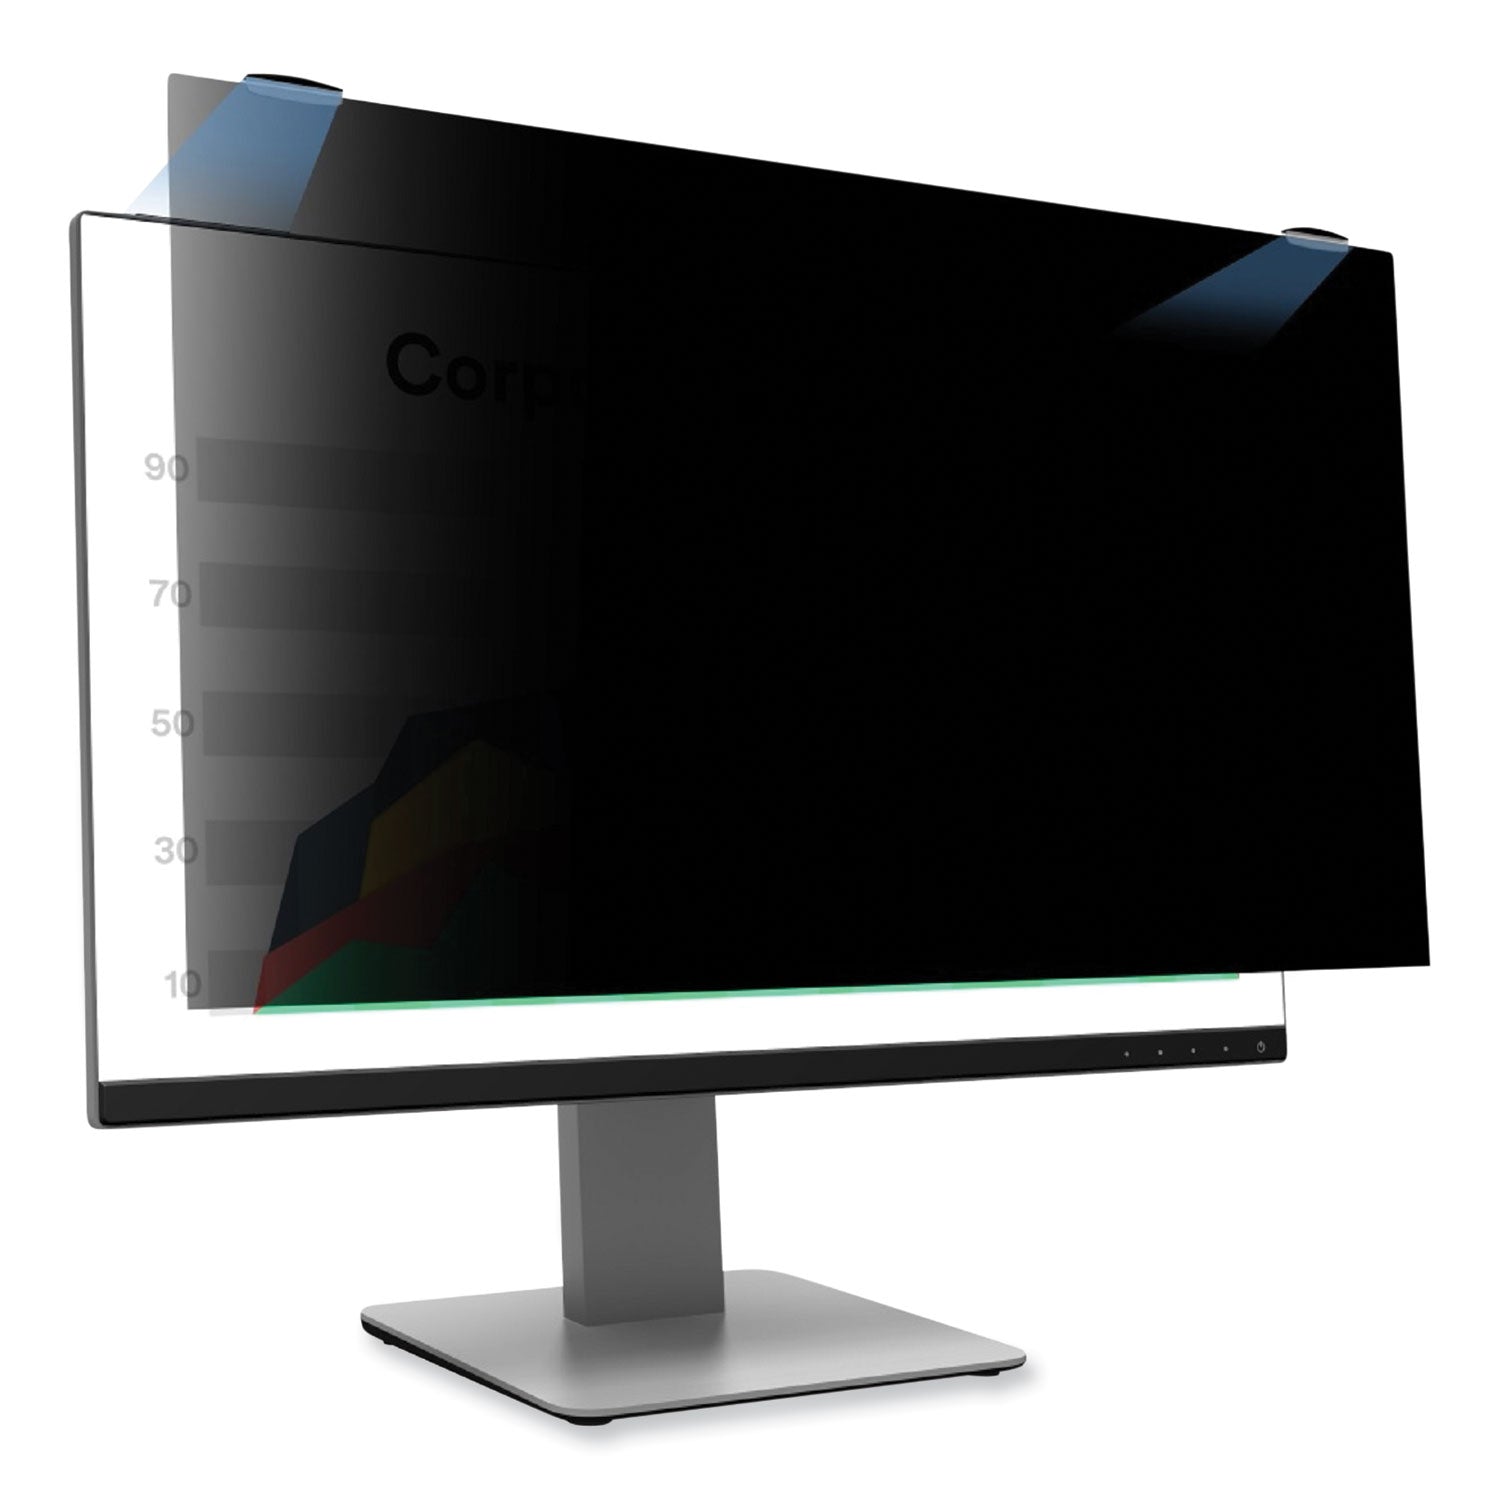 comply-magnetic-attach-privacy-filter-for-238-widescreen-flat-panel-monitor-169-aspect-ratio_mmmpf238w9em - 1